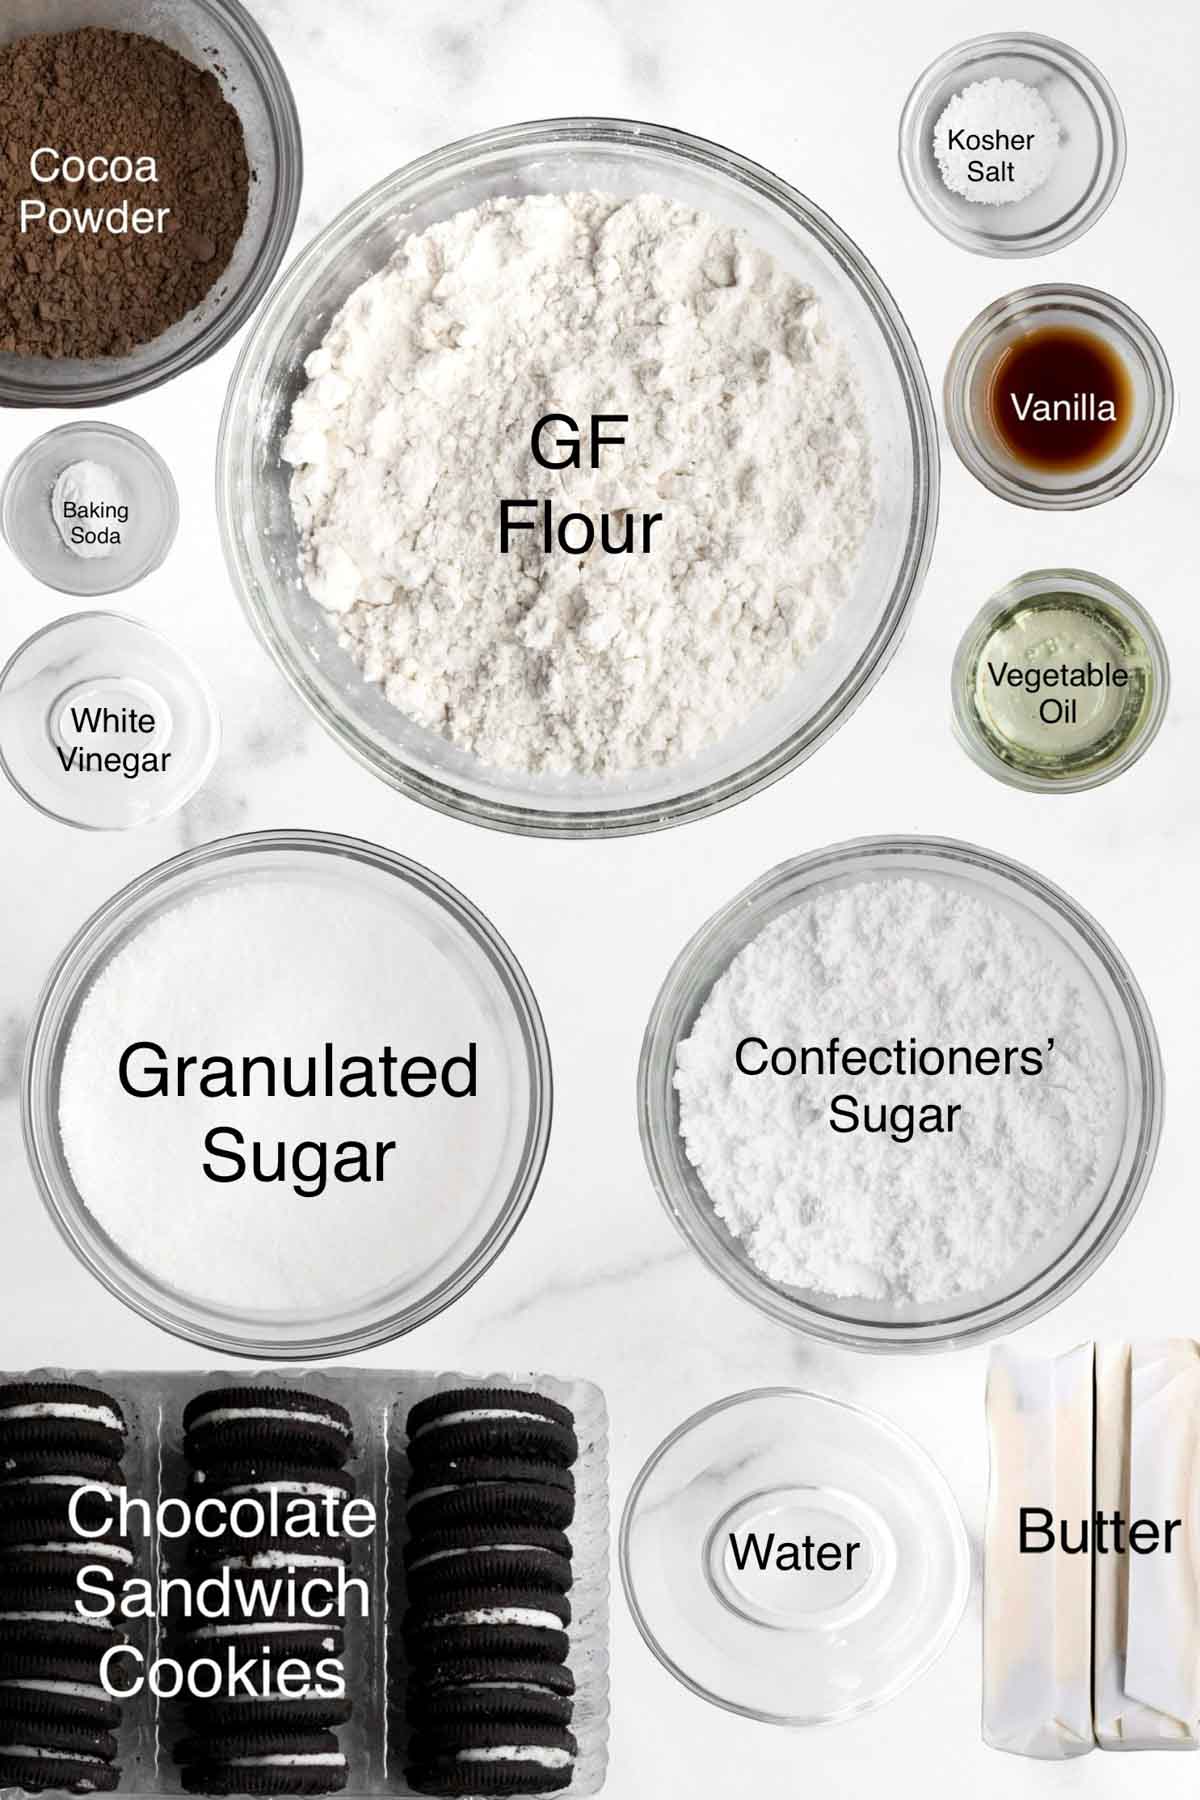 Cocoa powder, baking soda, white vinegar, gluten free flour, kosher salt, vanilla, vegetable oil, granulated sugar, confectioners' sugar, chocolate sandwich cookies, water and butter in separate containers.